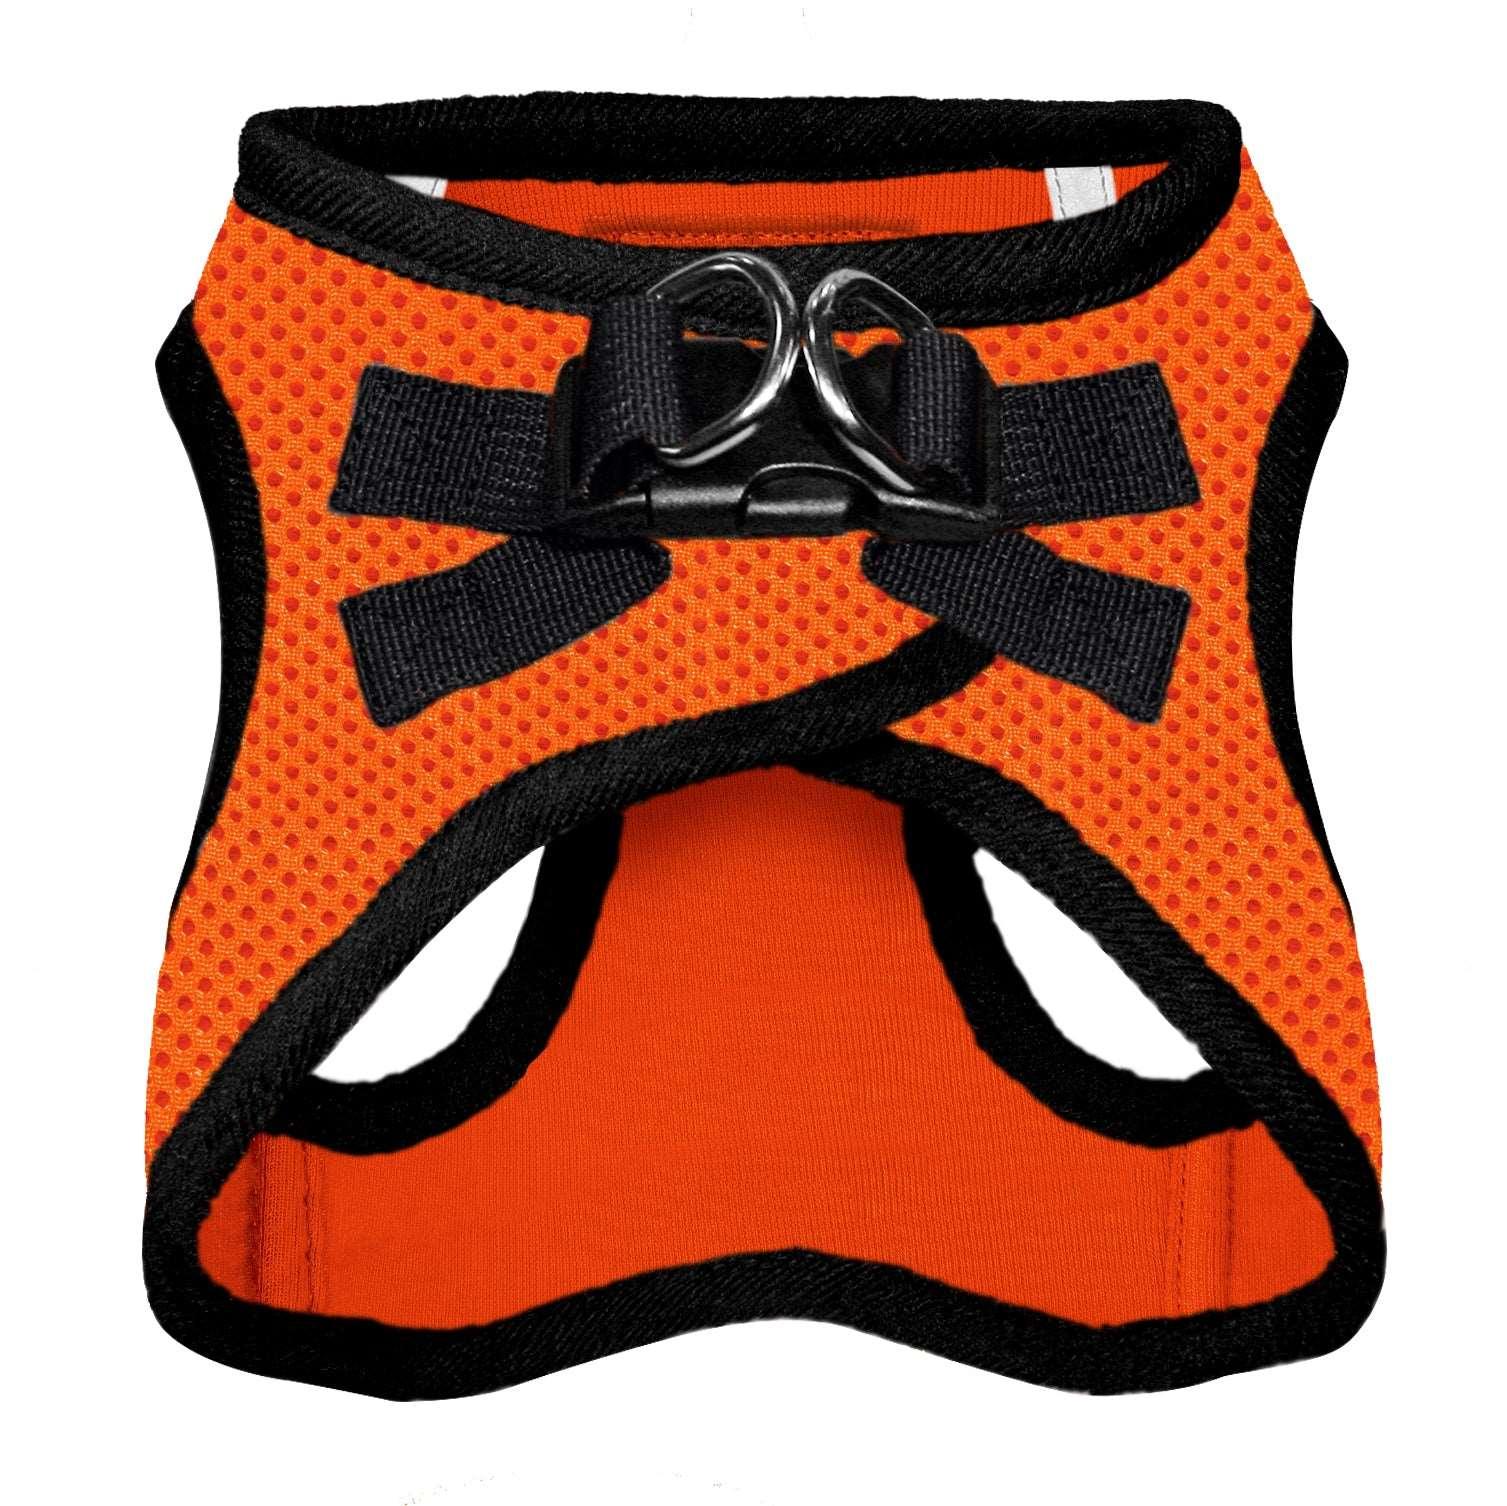 VOYAGER Step-In Air Pet Harness in Orange with Black Trim - Back